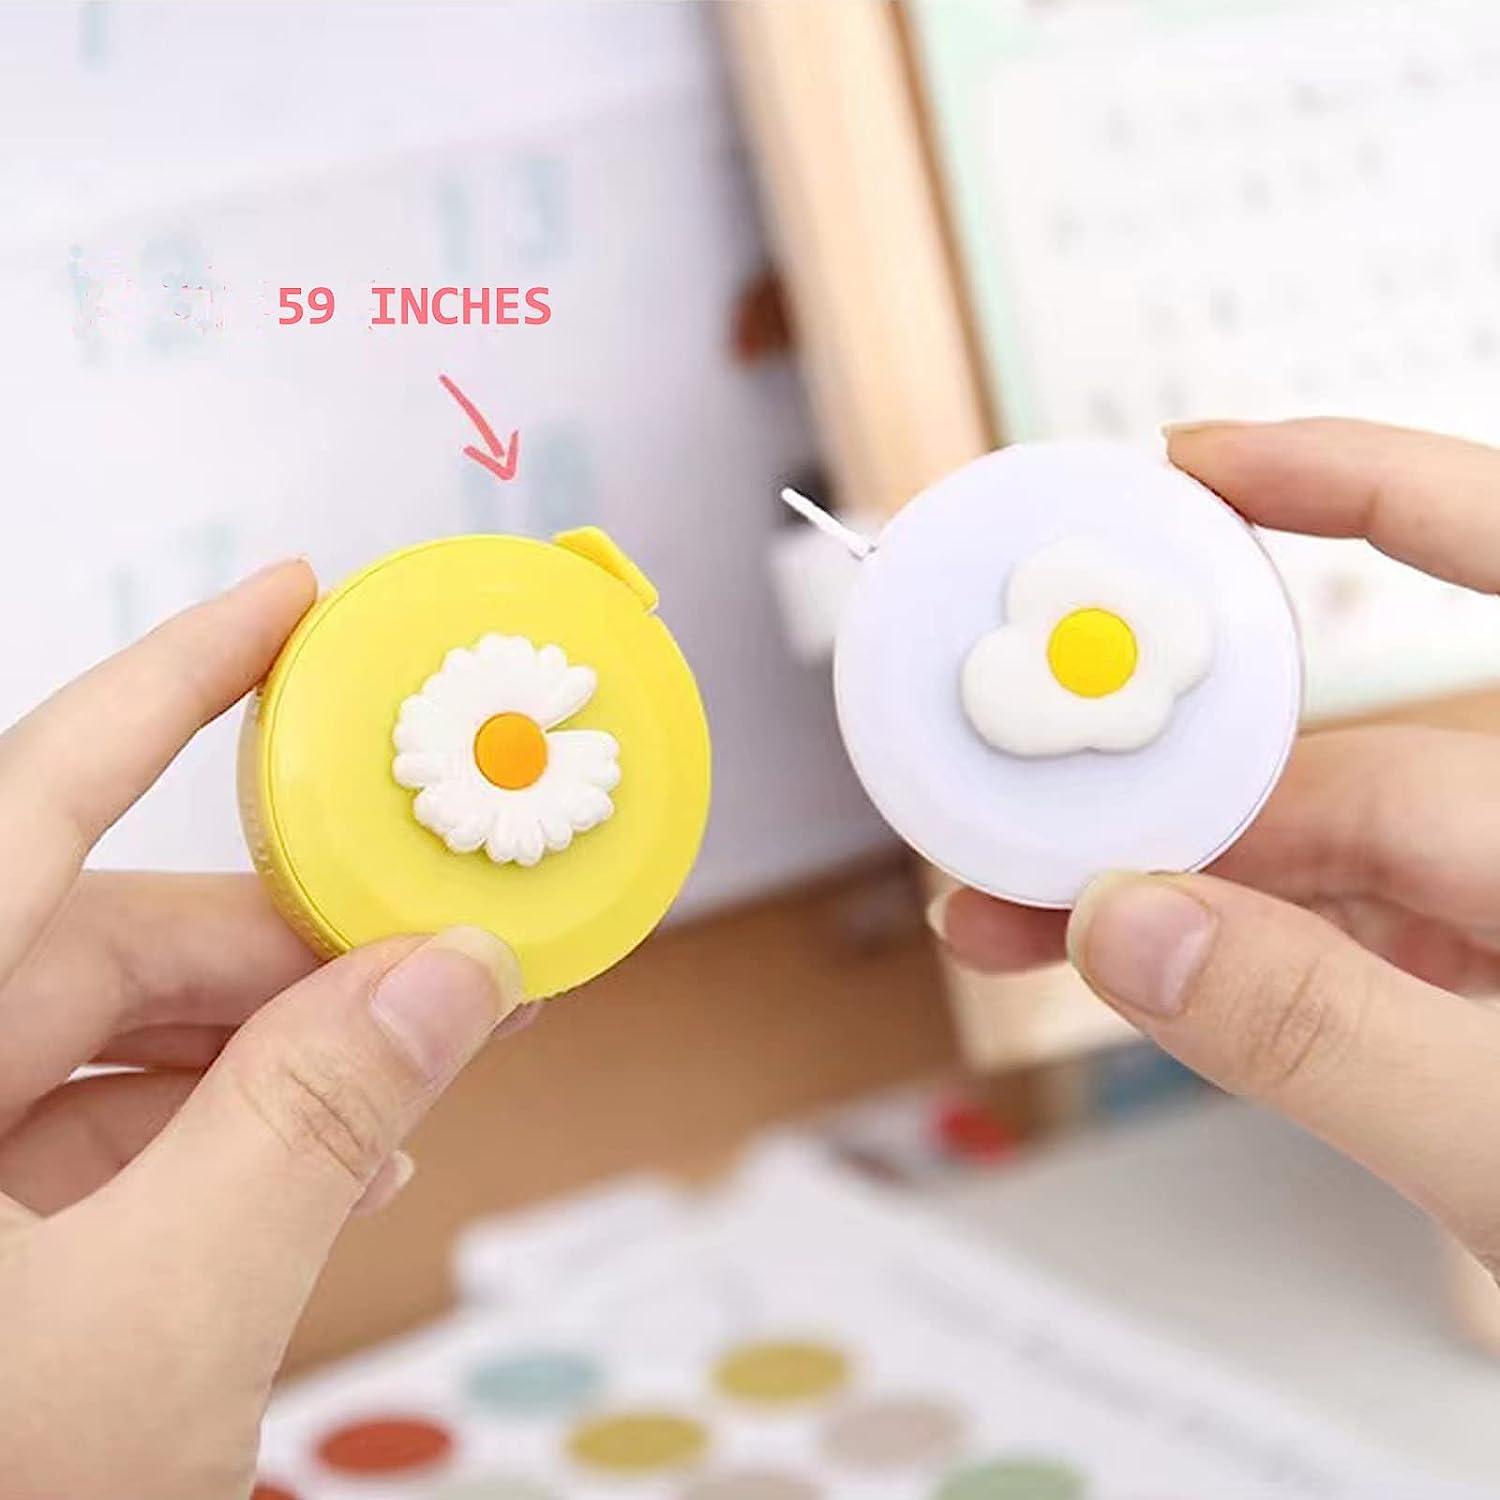 Soft Tape Measure Body Measuring Tape Cloth Ruler-Sewing Tailor Retractable  US